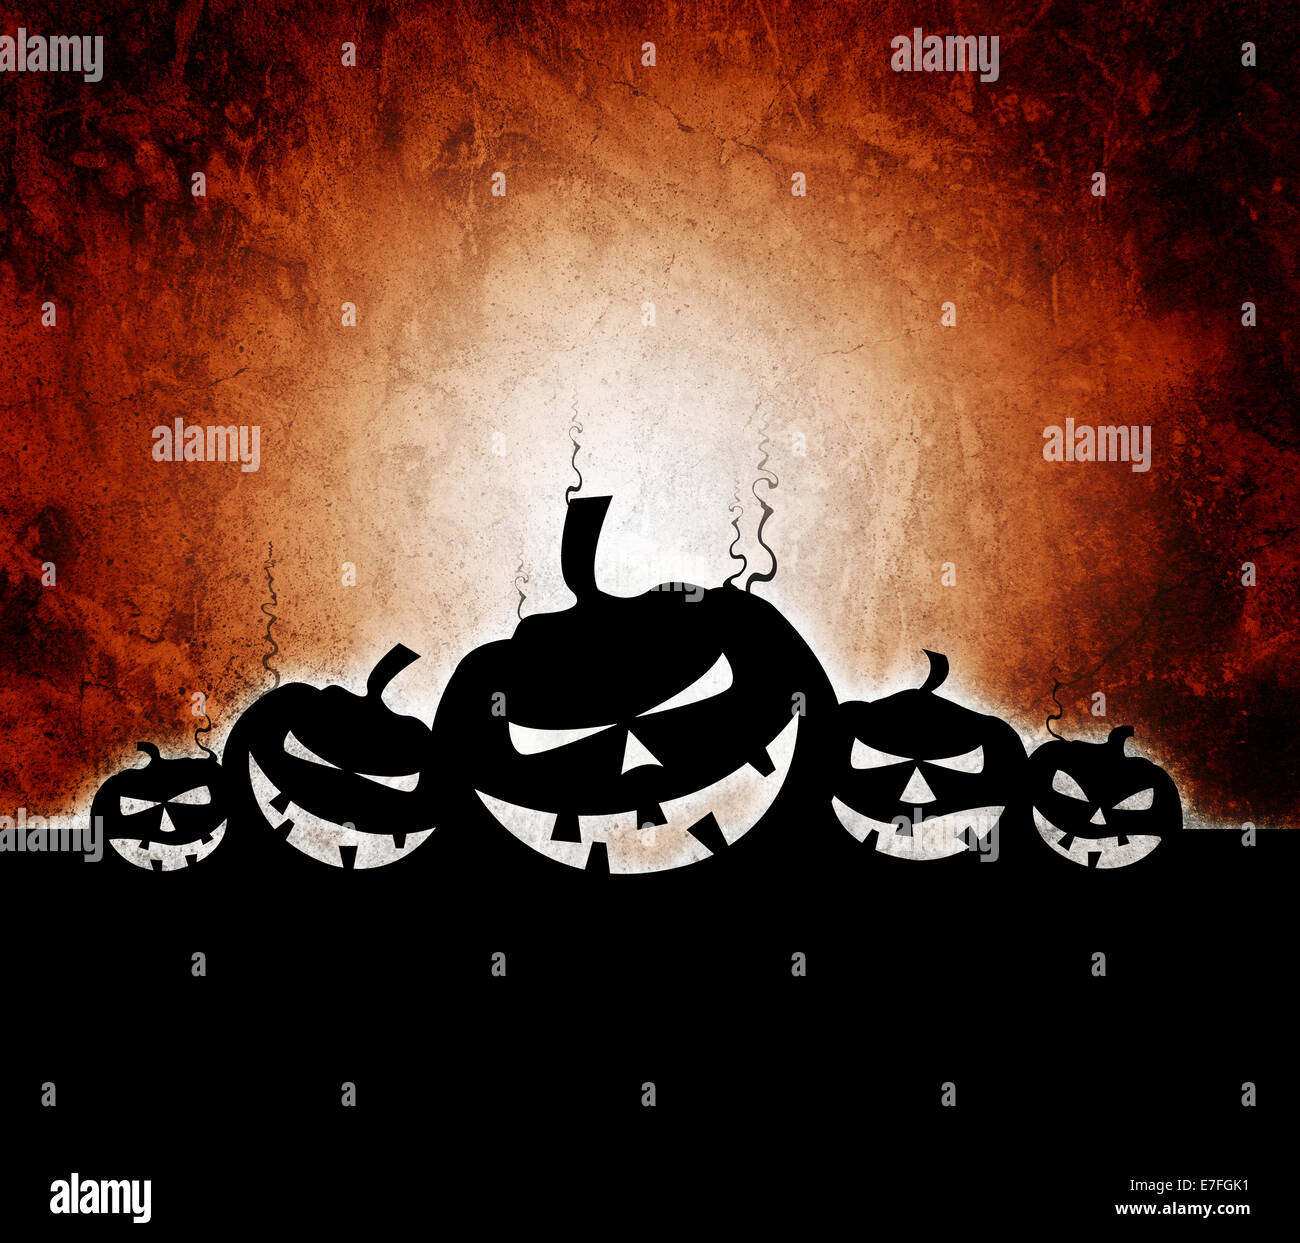 Halloween background for your design. Stock Photo